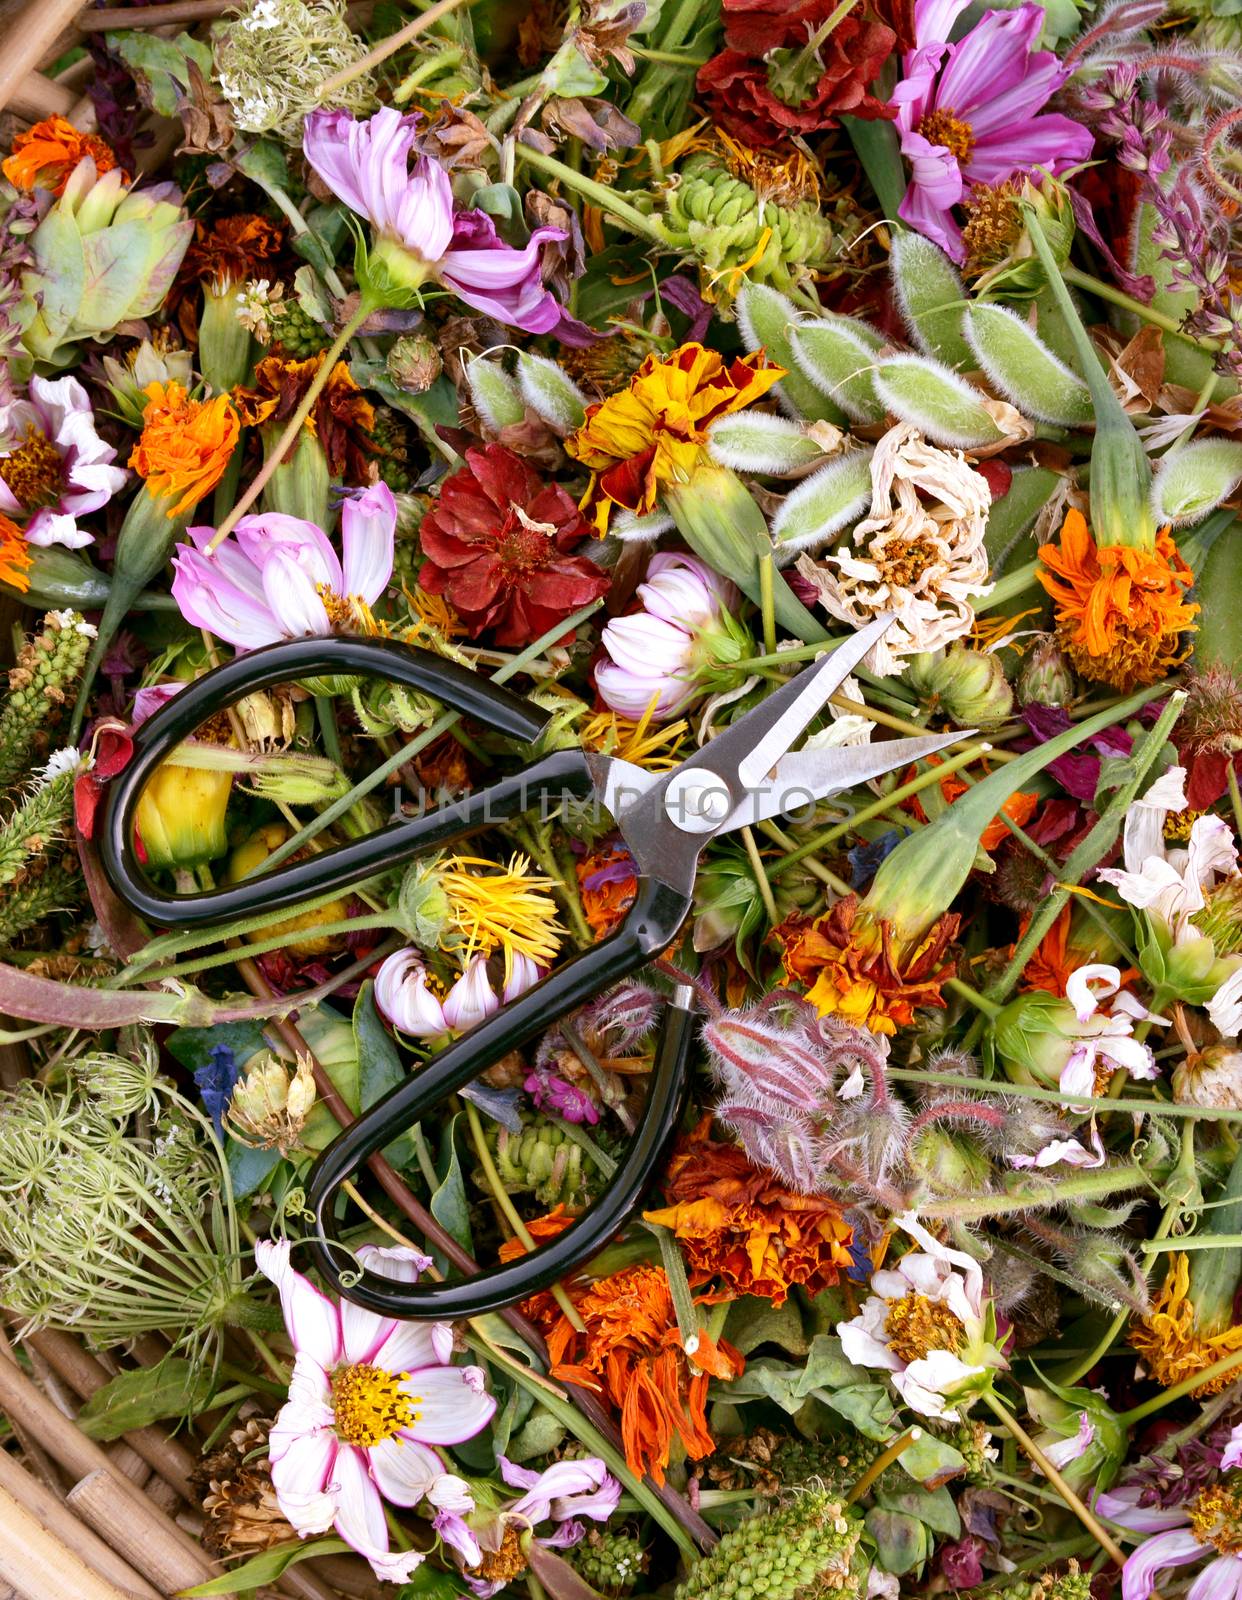 Sharp retro florist scissors on a bed of faded flower heads by sarahdoow